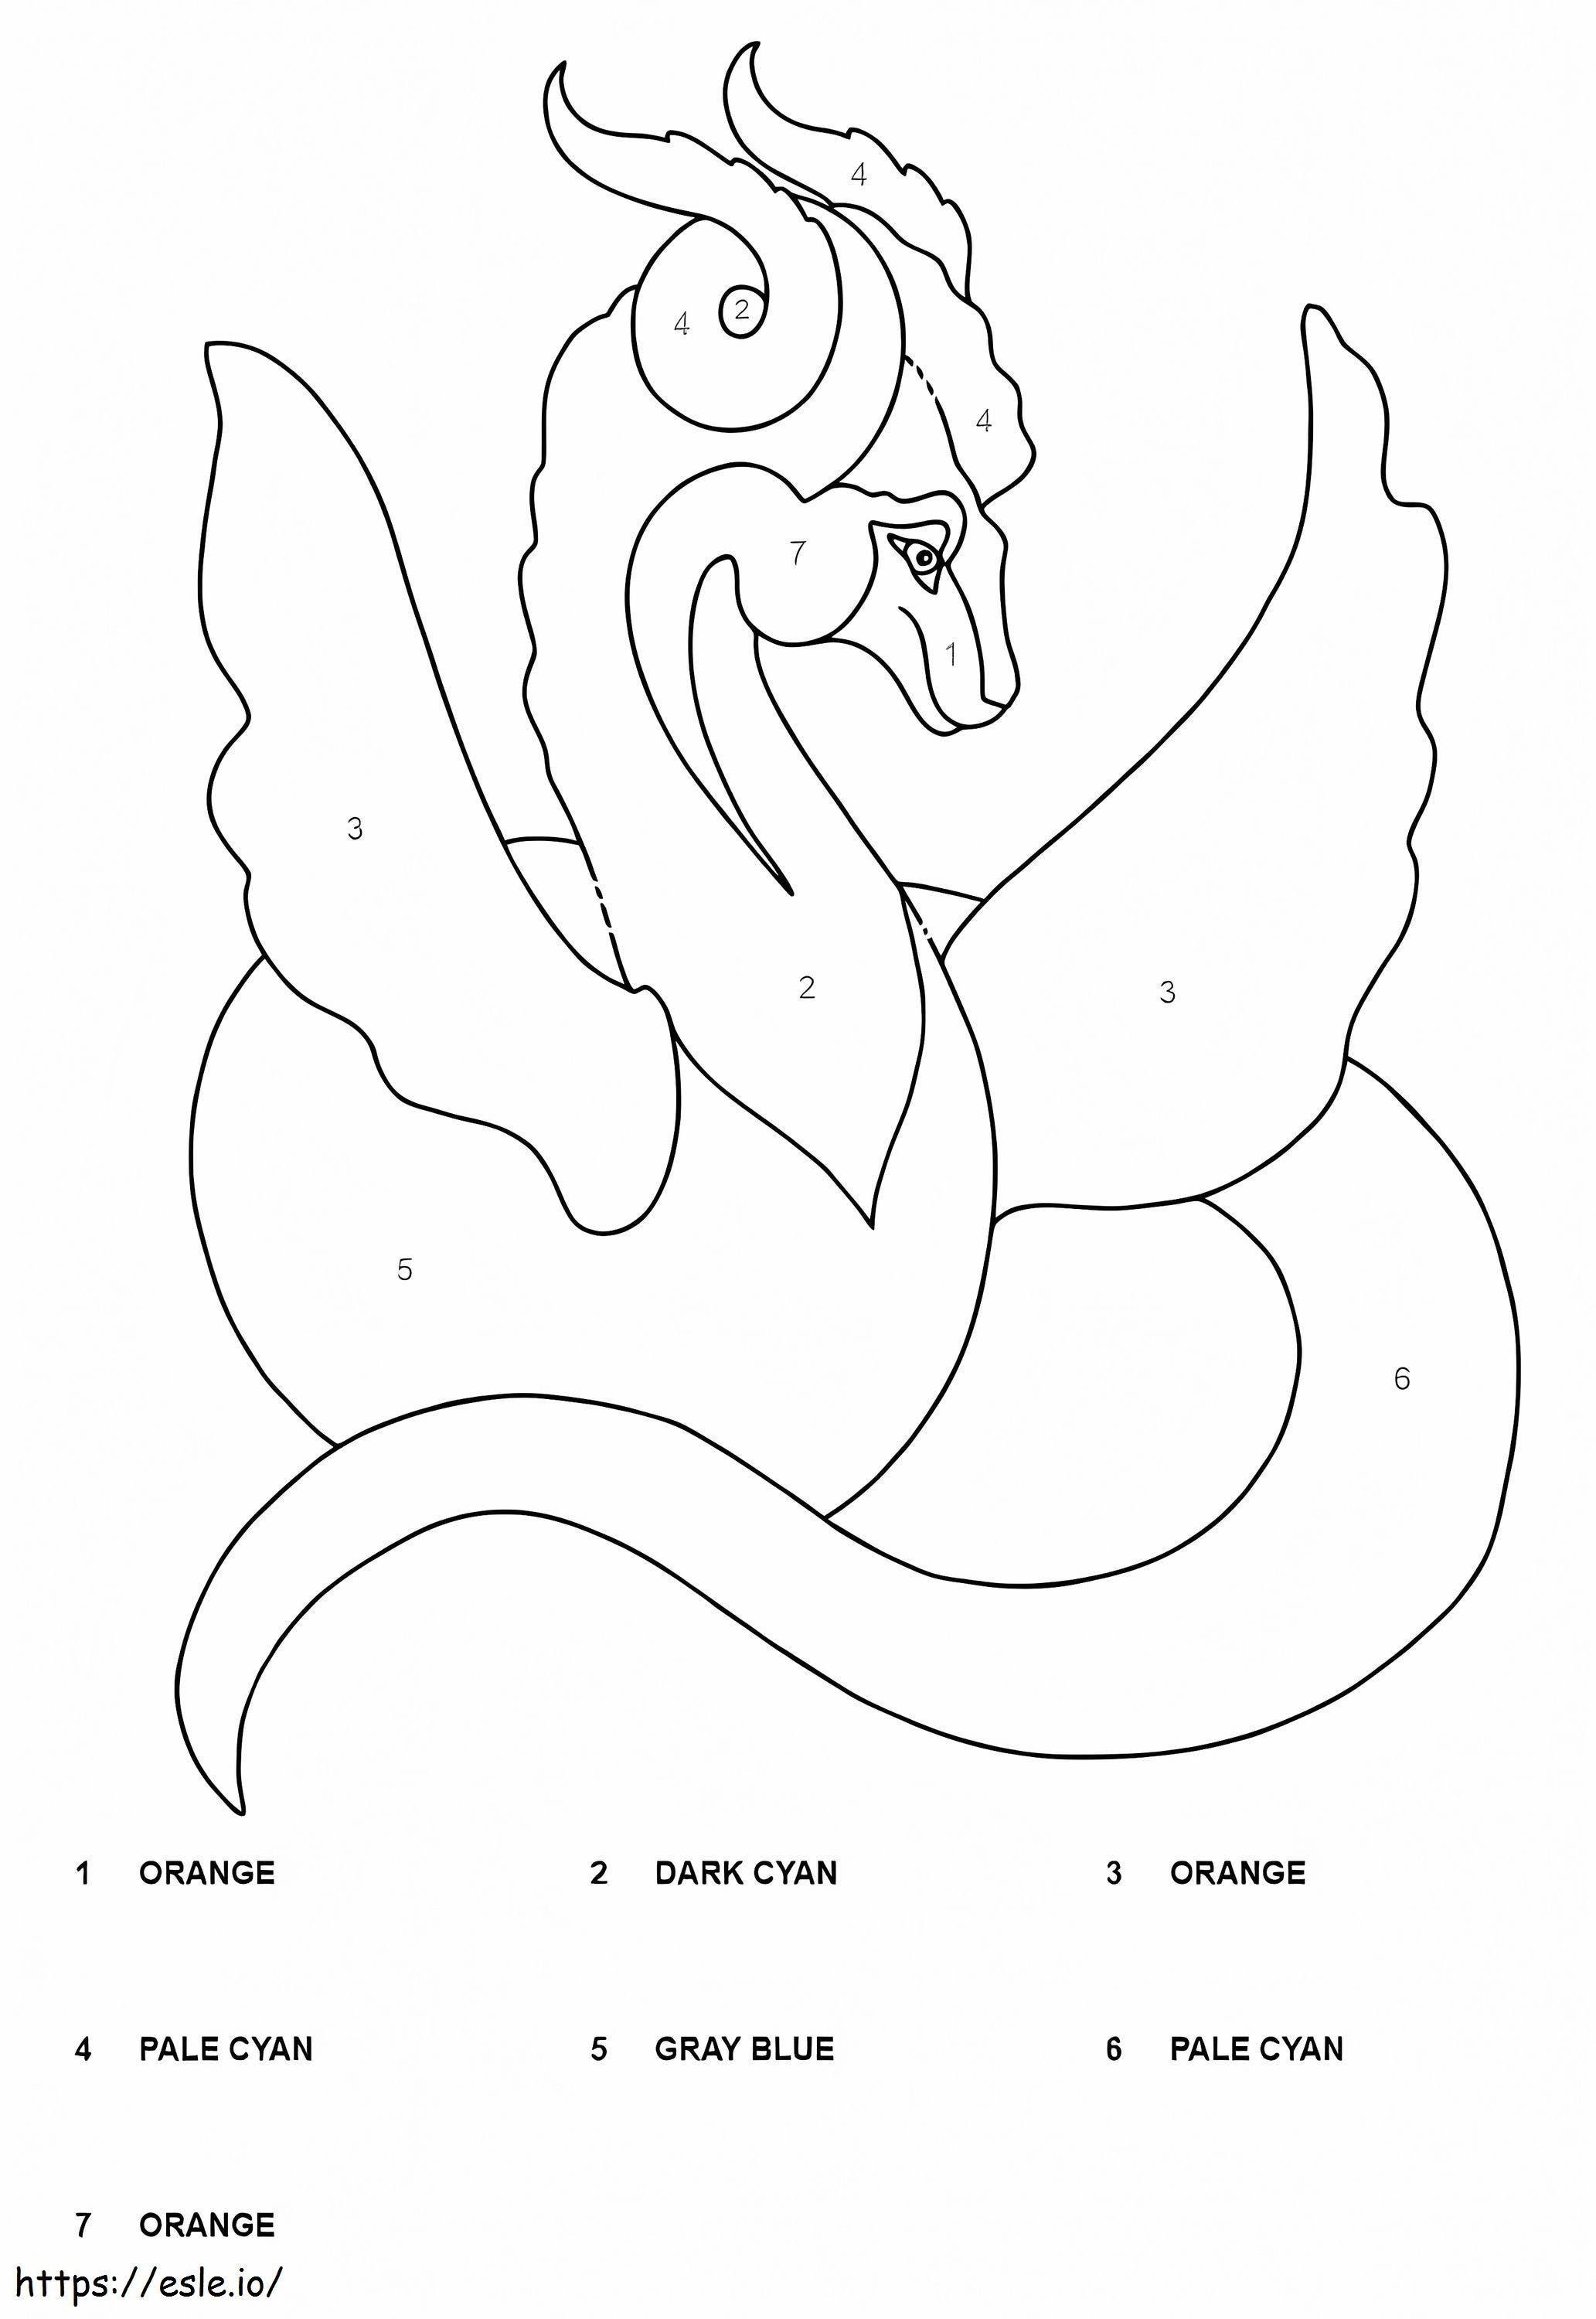 Wonderful Dragon Color By Number coloring page